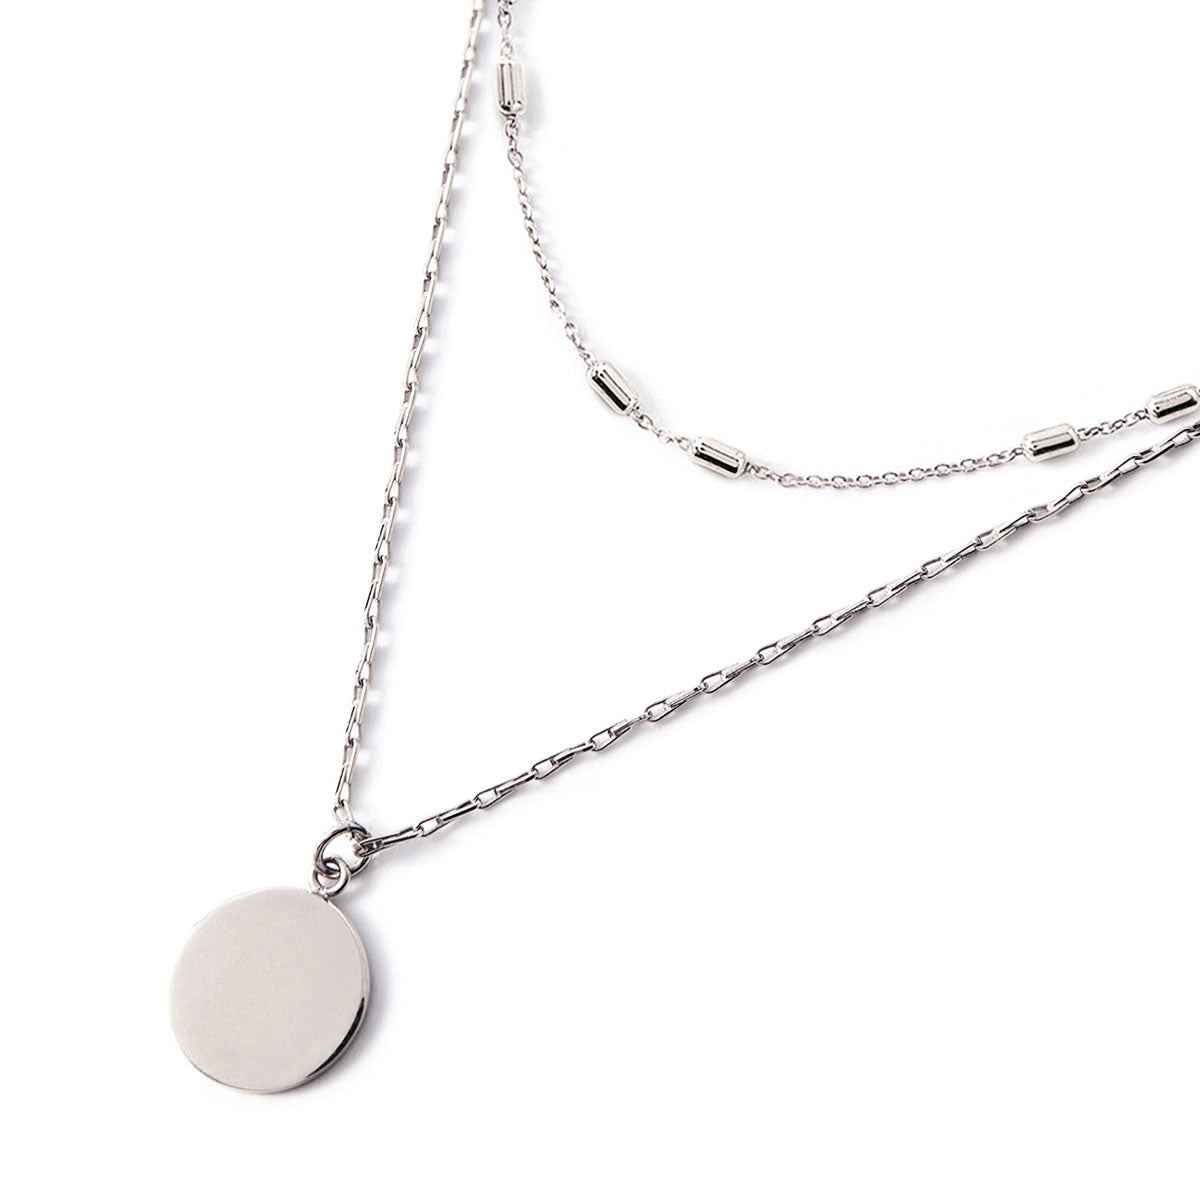 AMYO Layered in Jewelry Crystal – Silver Disc Chain Delicate Sterling Set Necklace